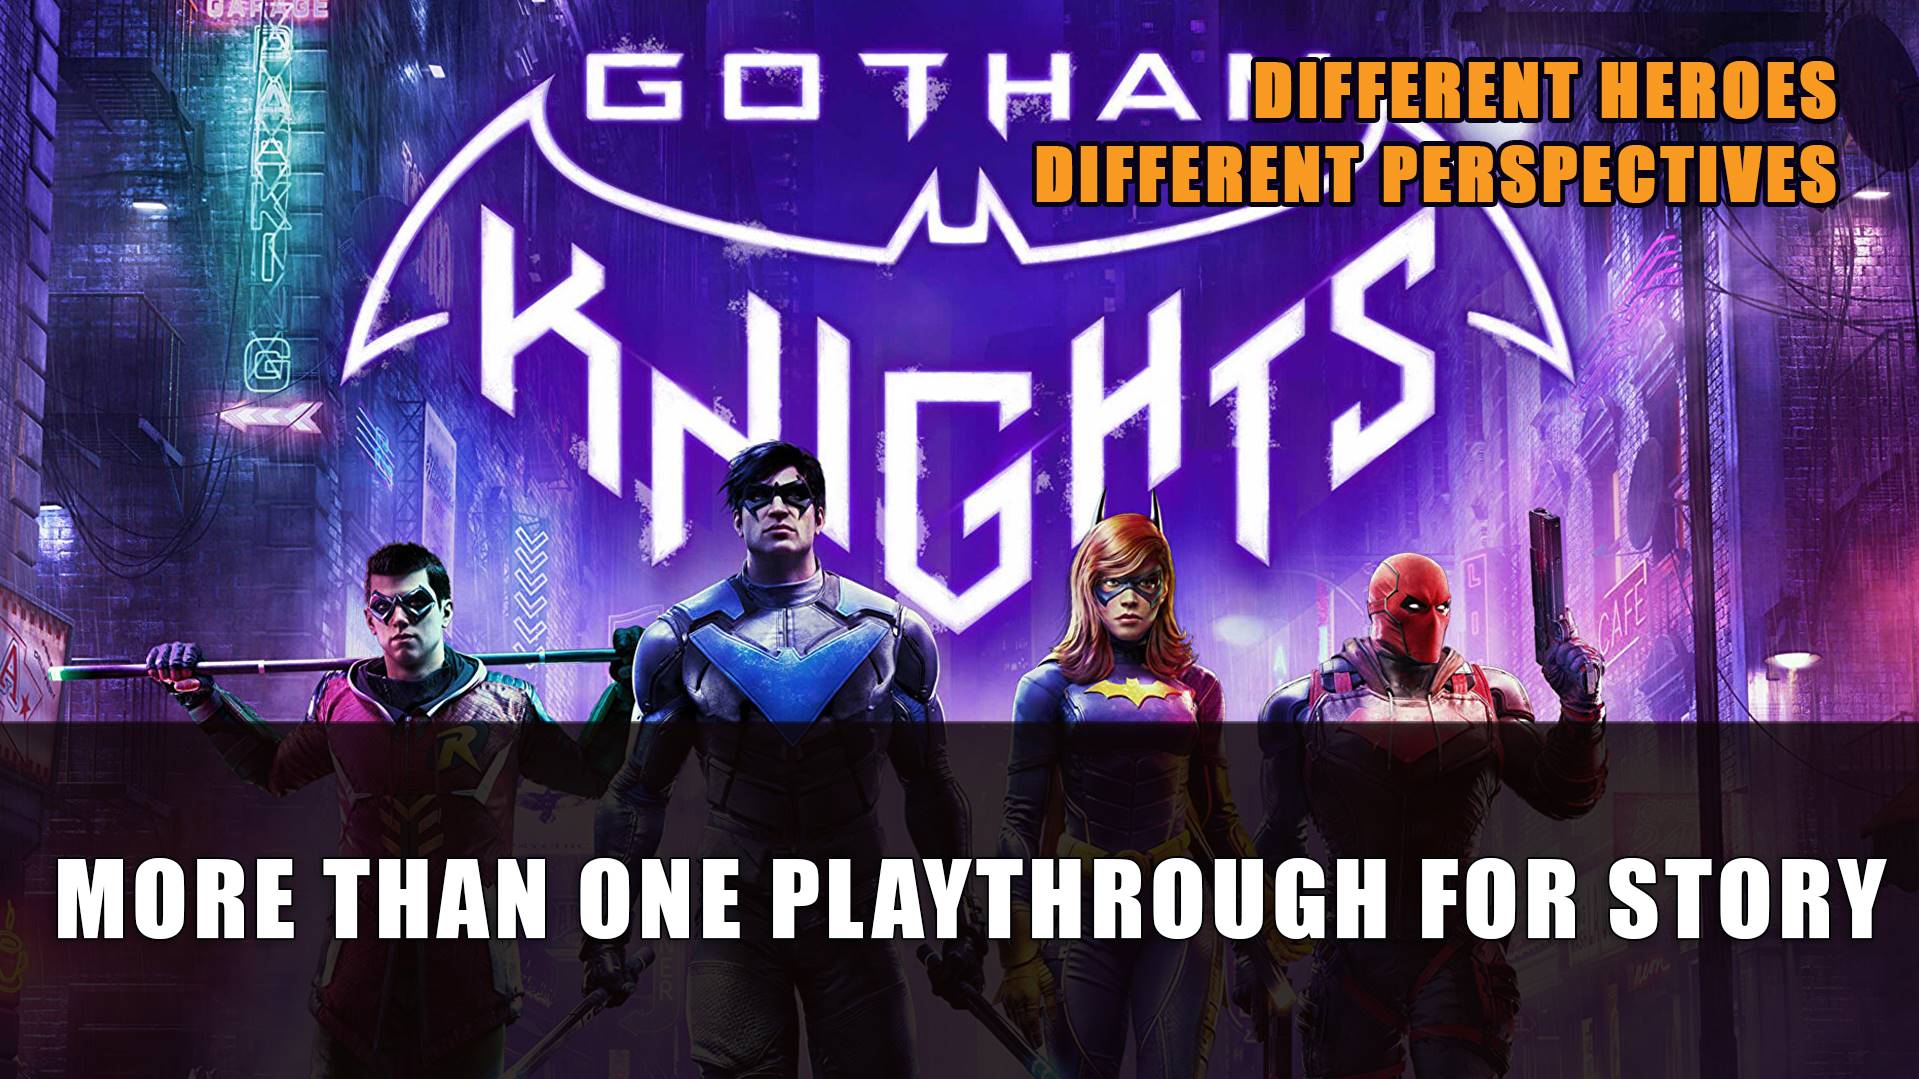 Gotham Knights Trophy Guide & Road Map